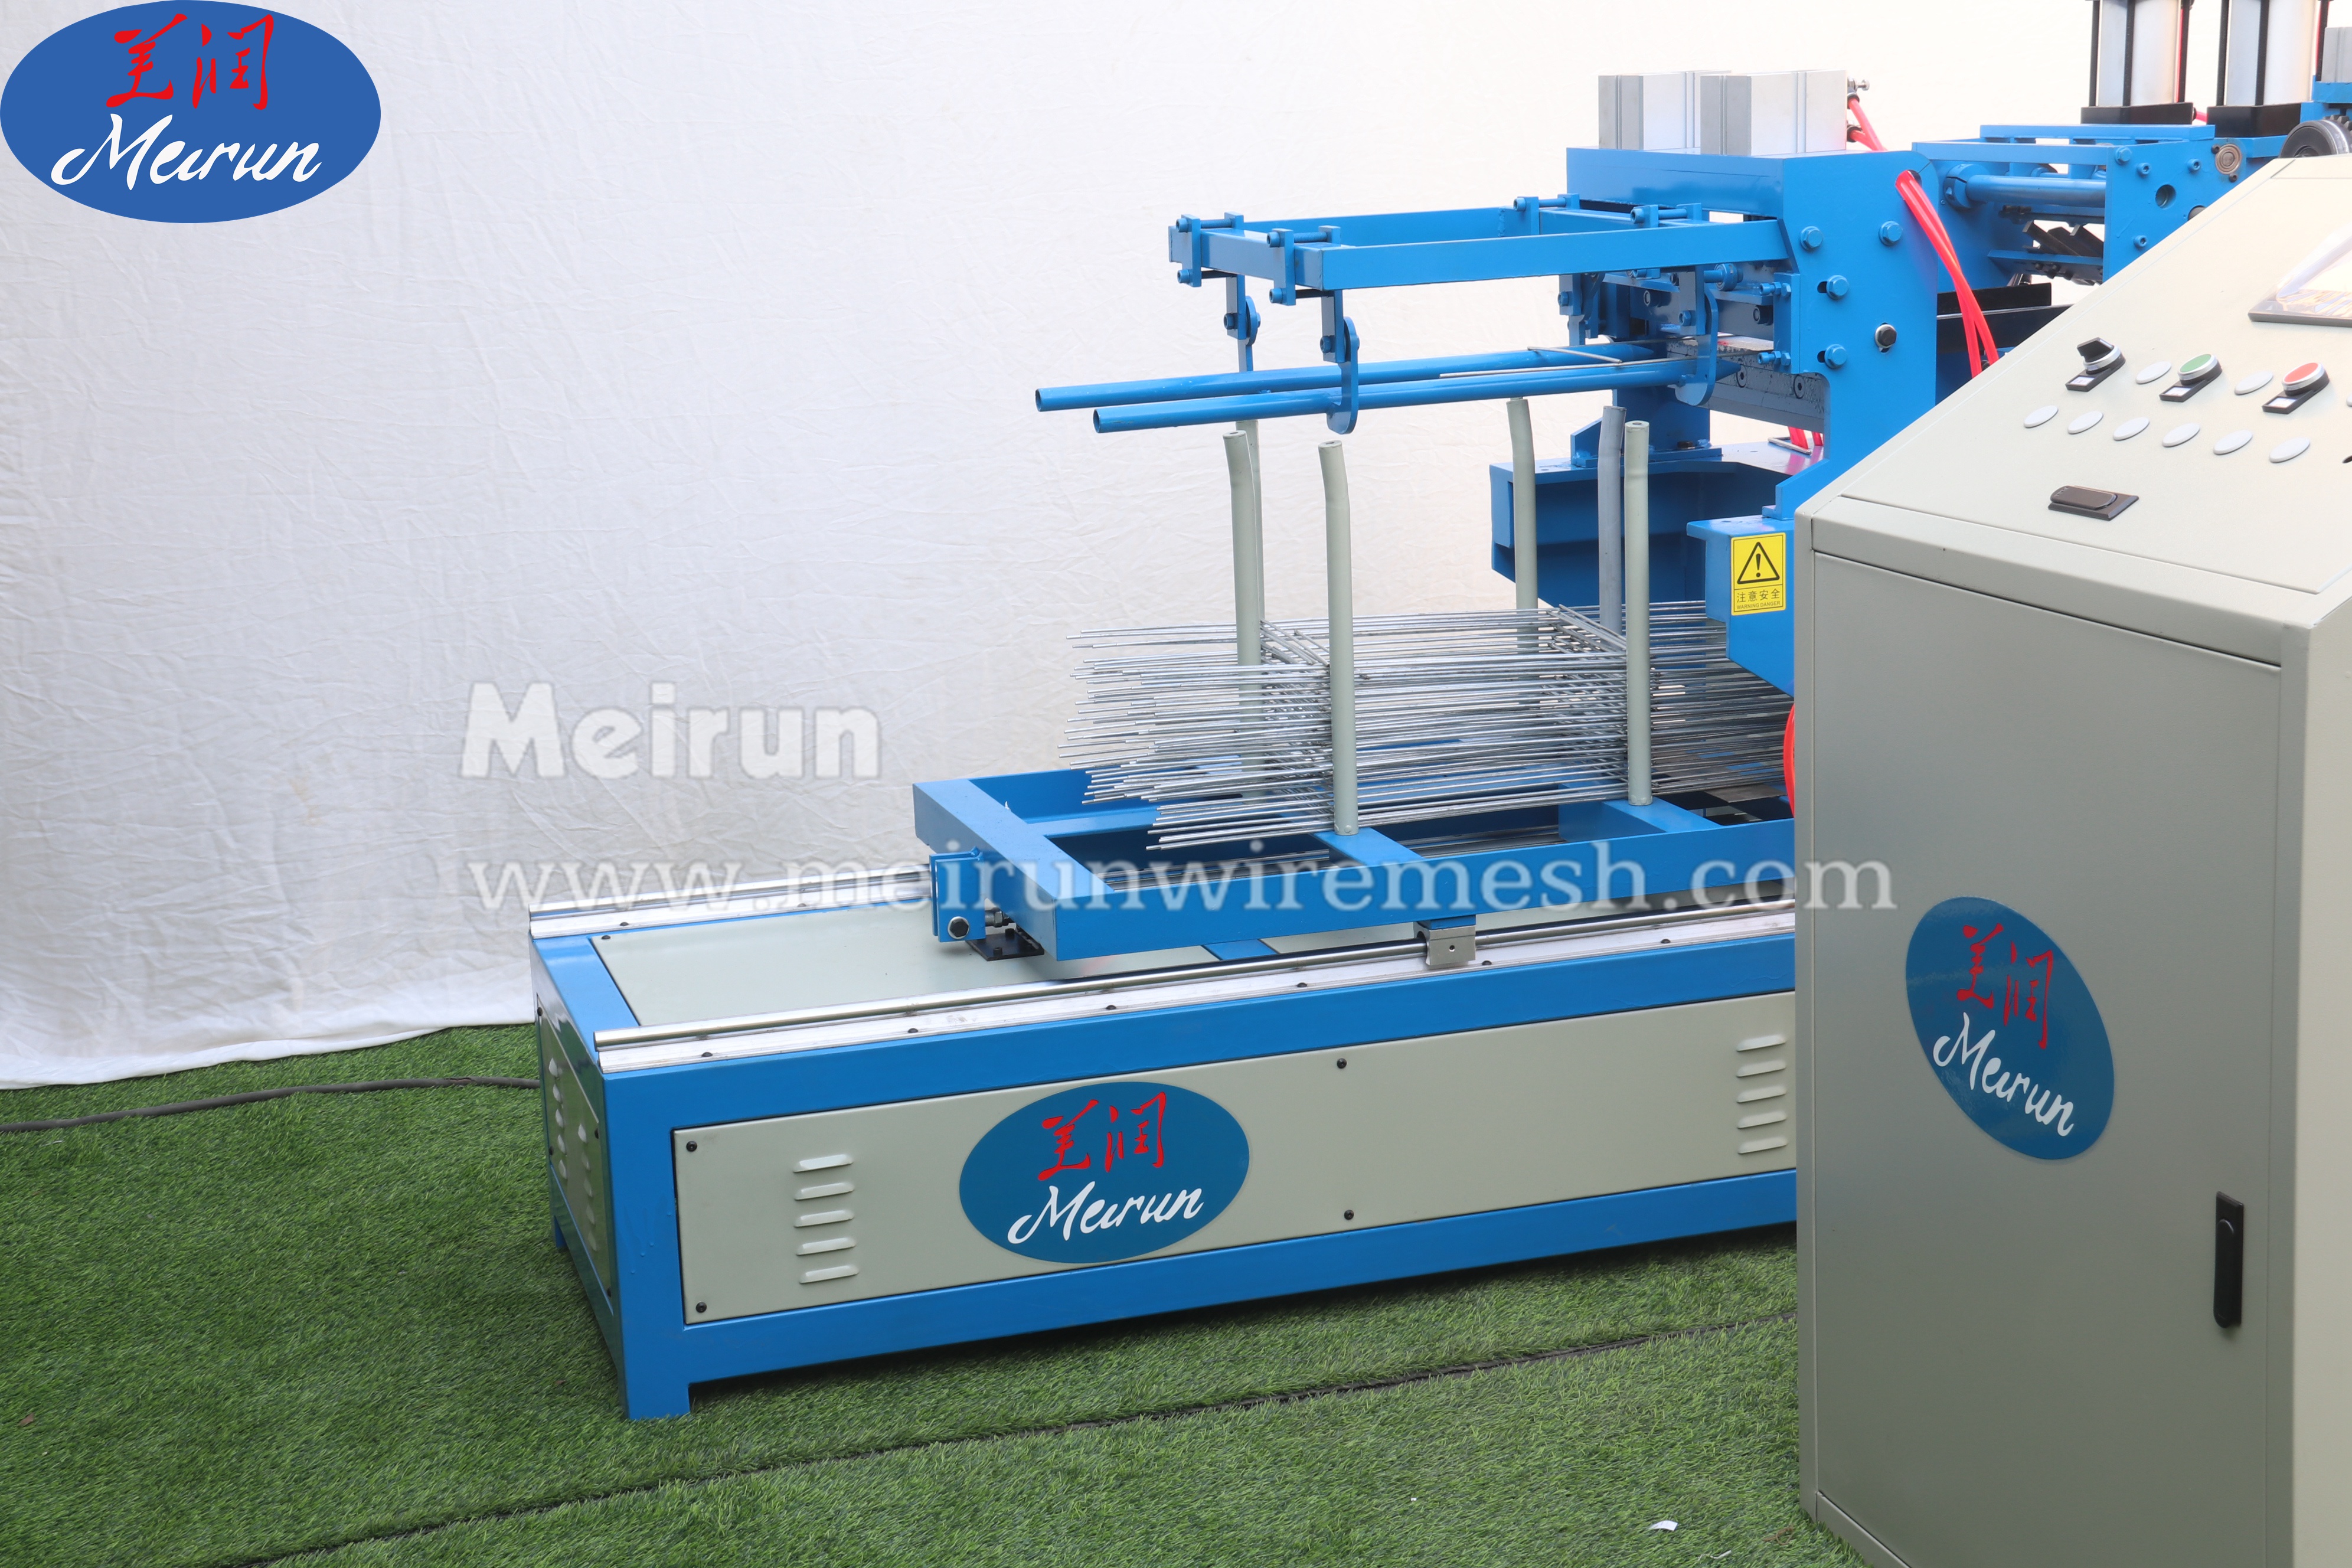  Chinese Brick Force Wire Welded Mesh Making Machine Popular in The World 